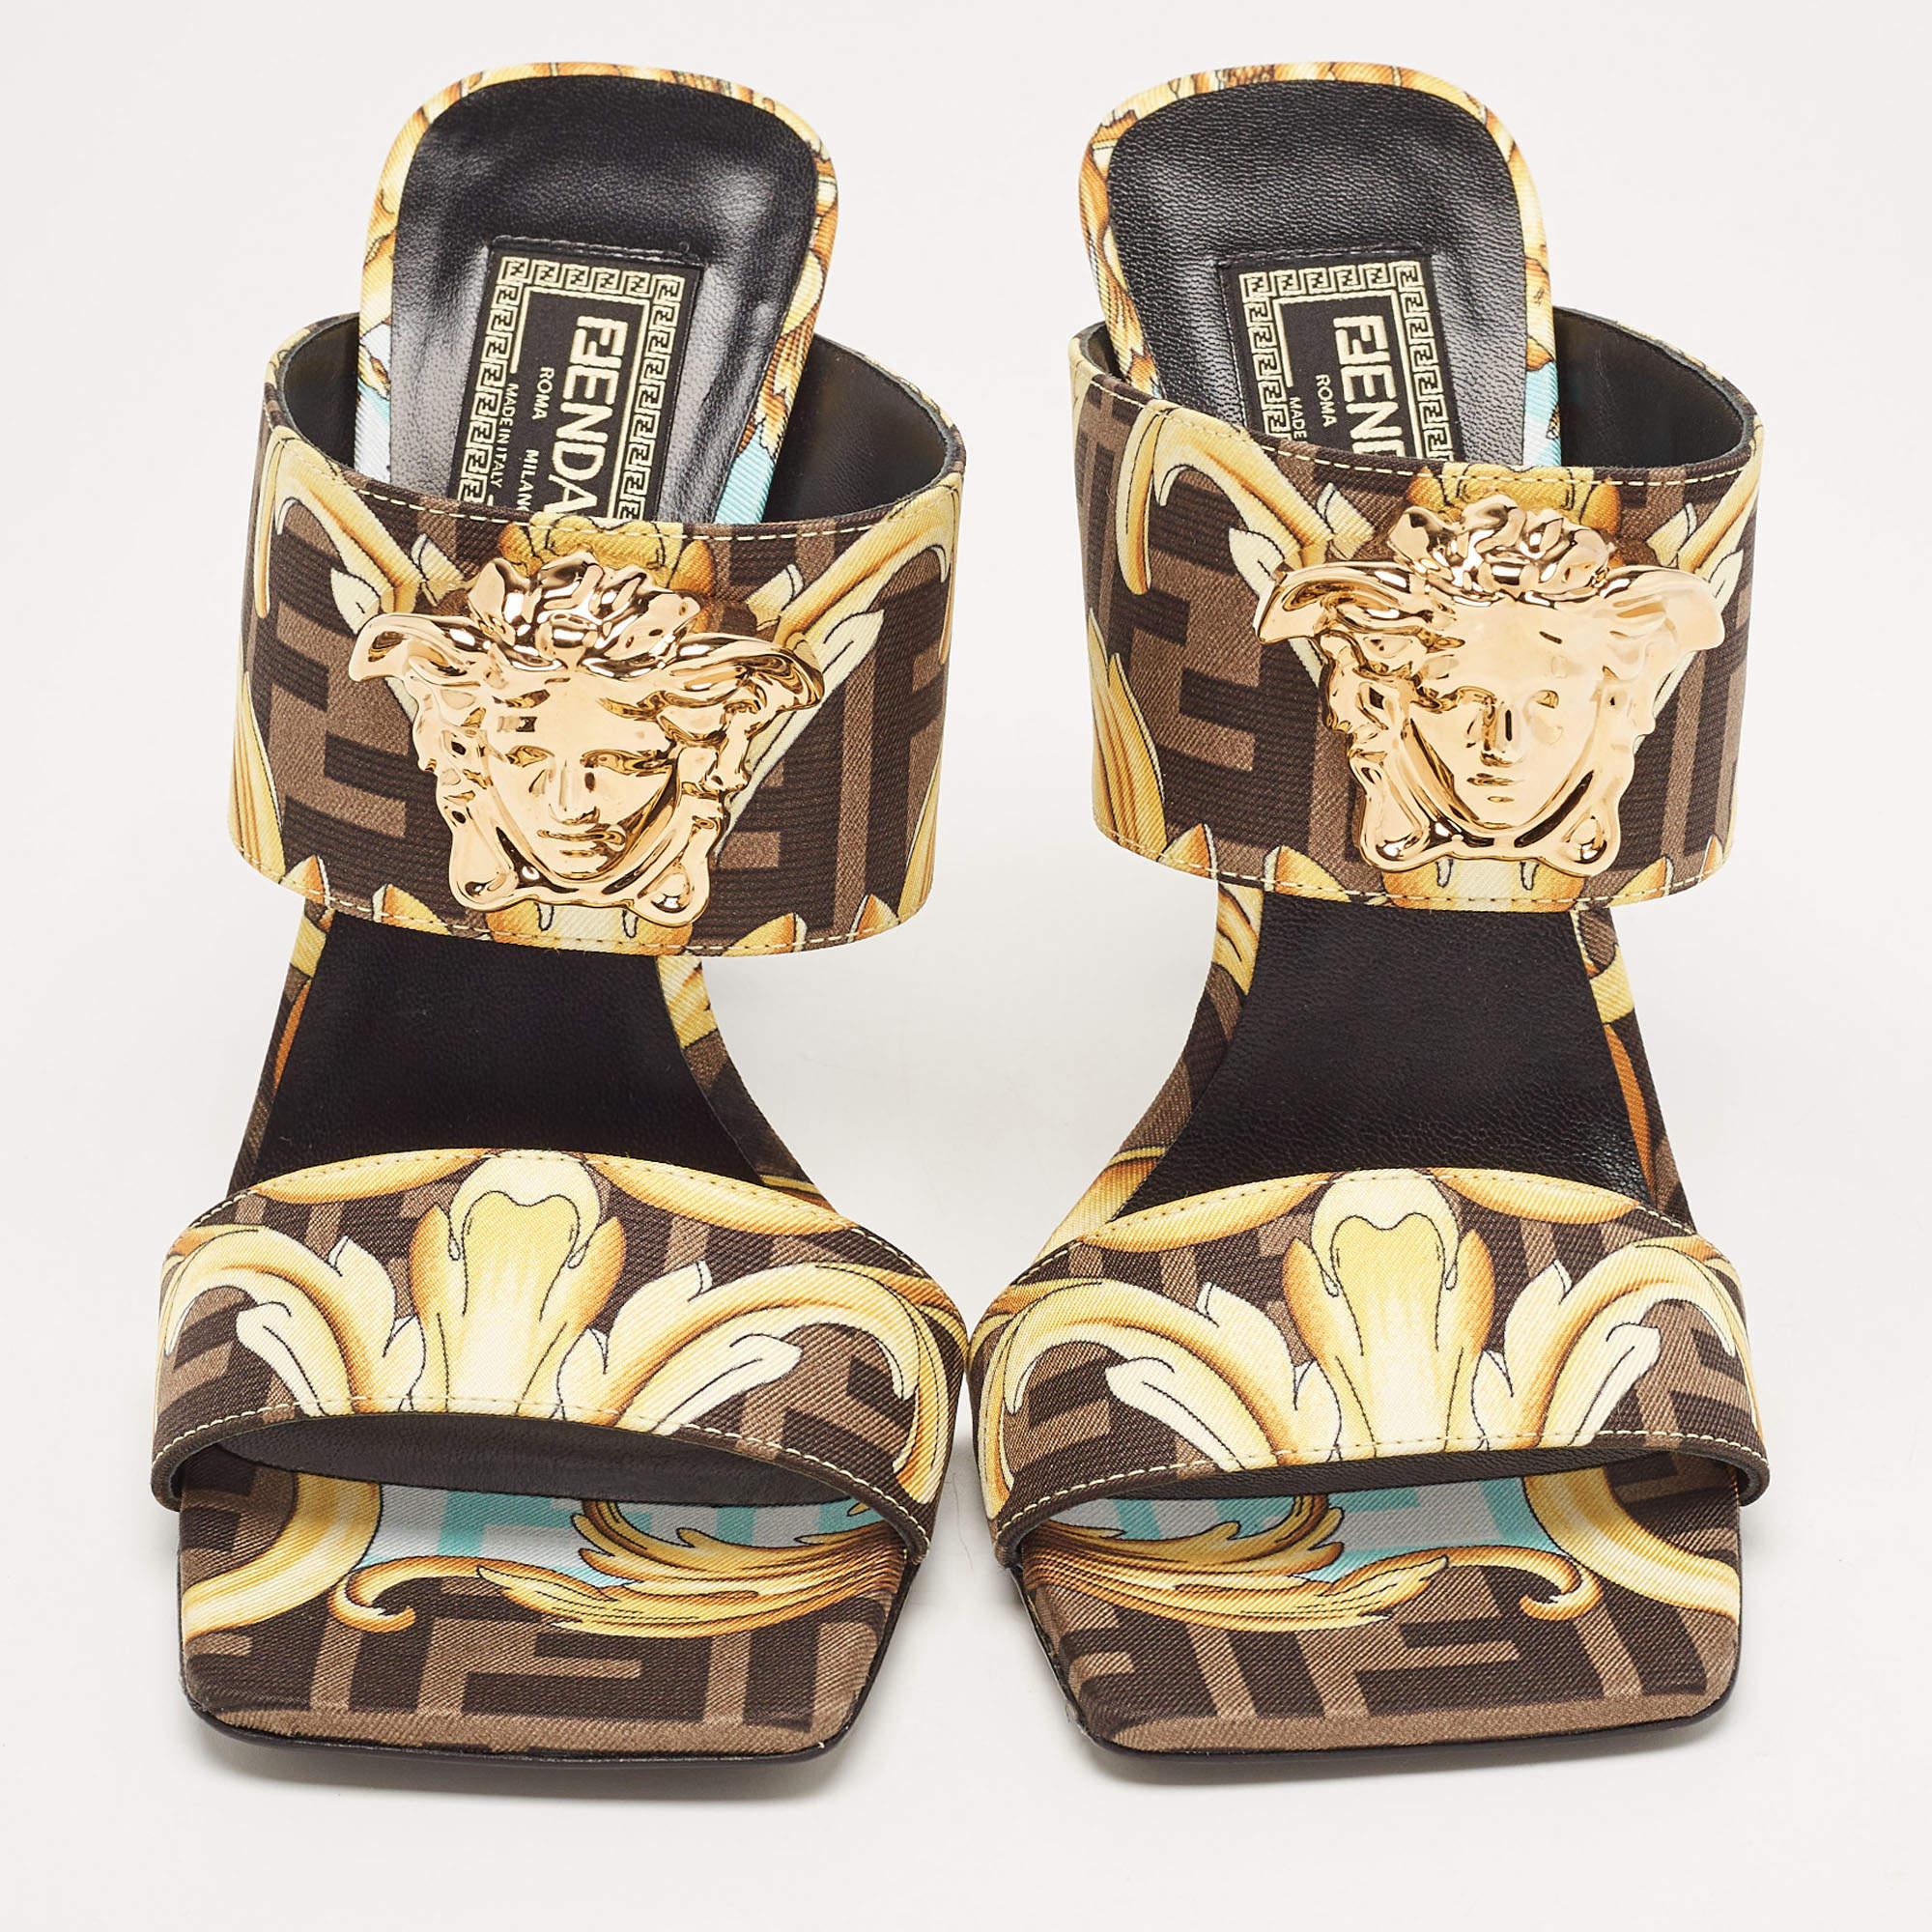 Perfectly sewn and finished to ensure an elegant look and fit, these Fendi x Versace slides are a purchase you'll love flaunting. They look great on the feet.

